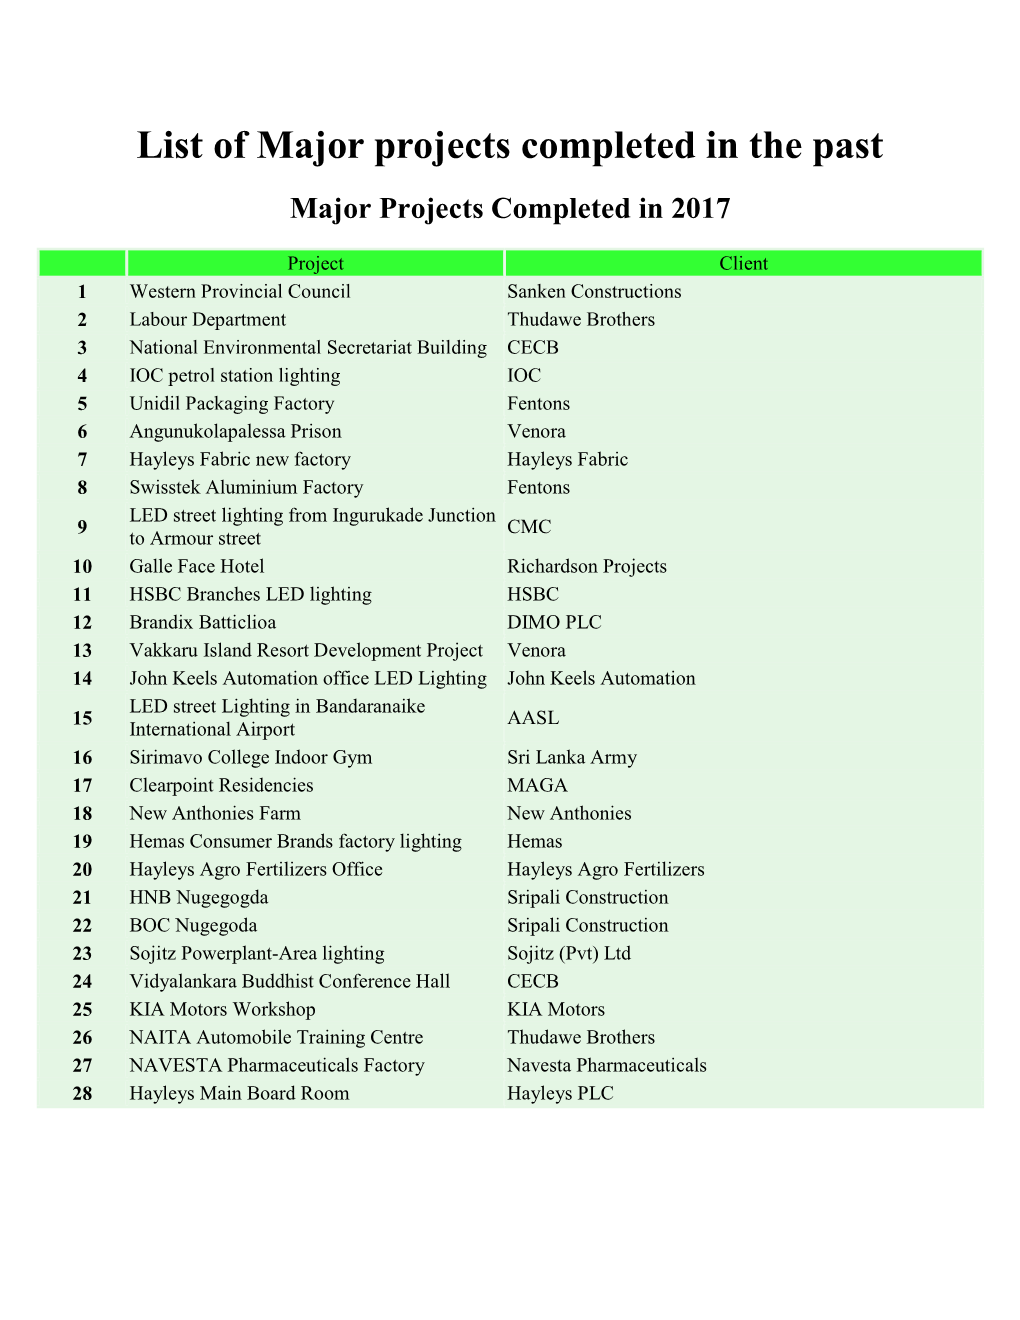 List of Major Projects Completed in the Past Major Projects Completed in 2017